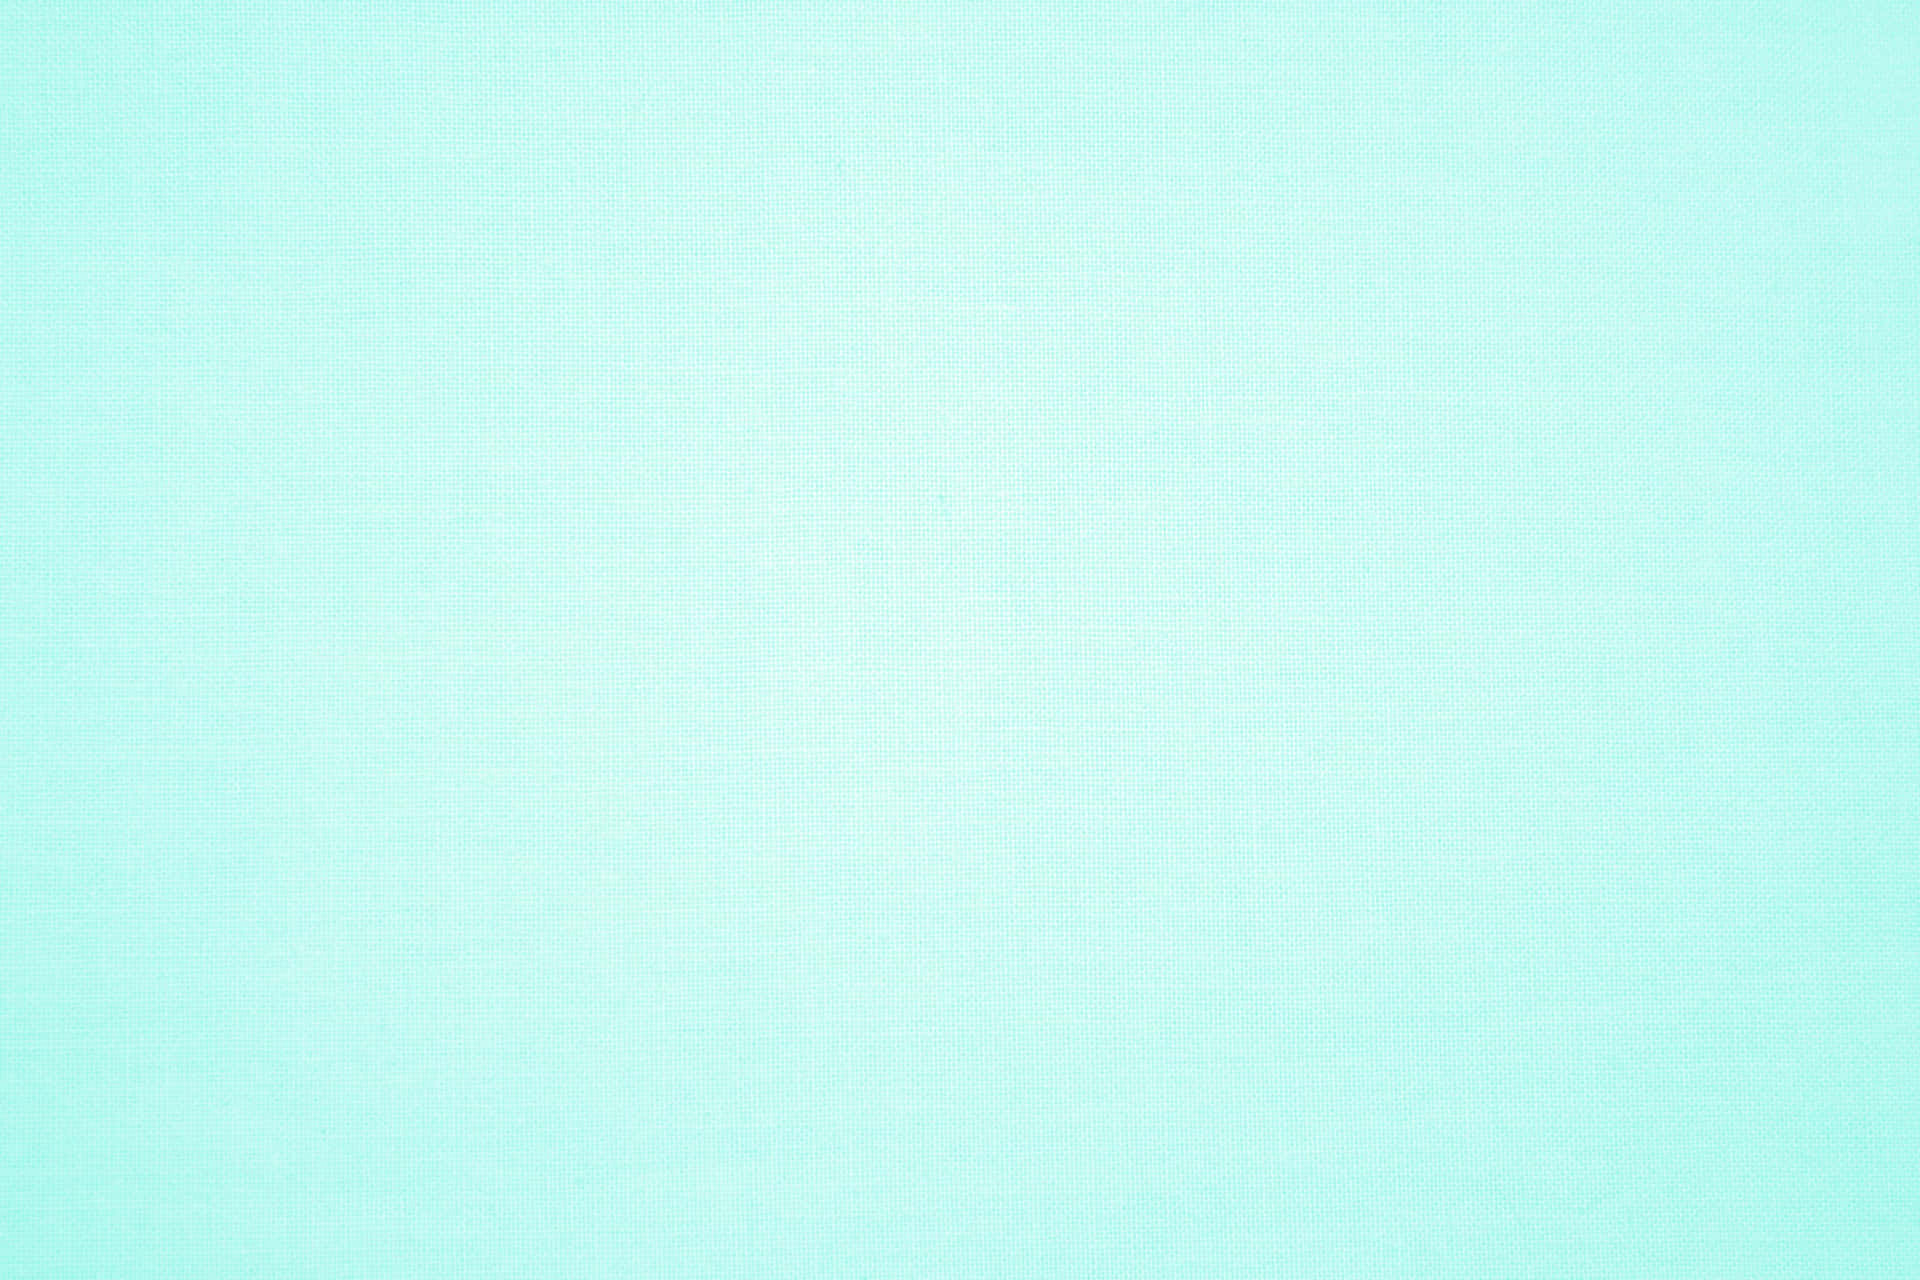 A peaceful background of light teal